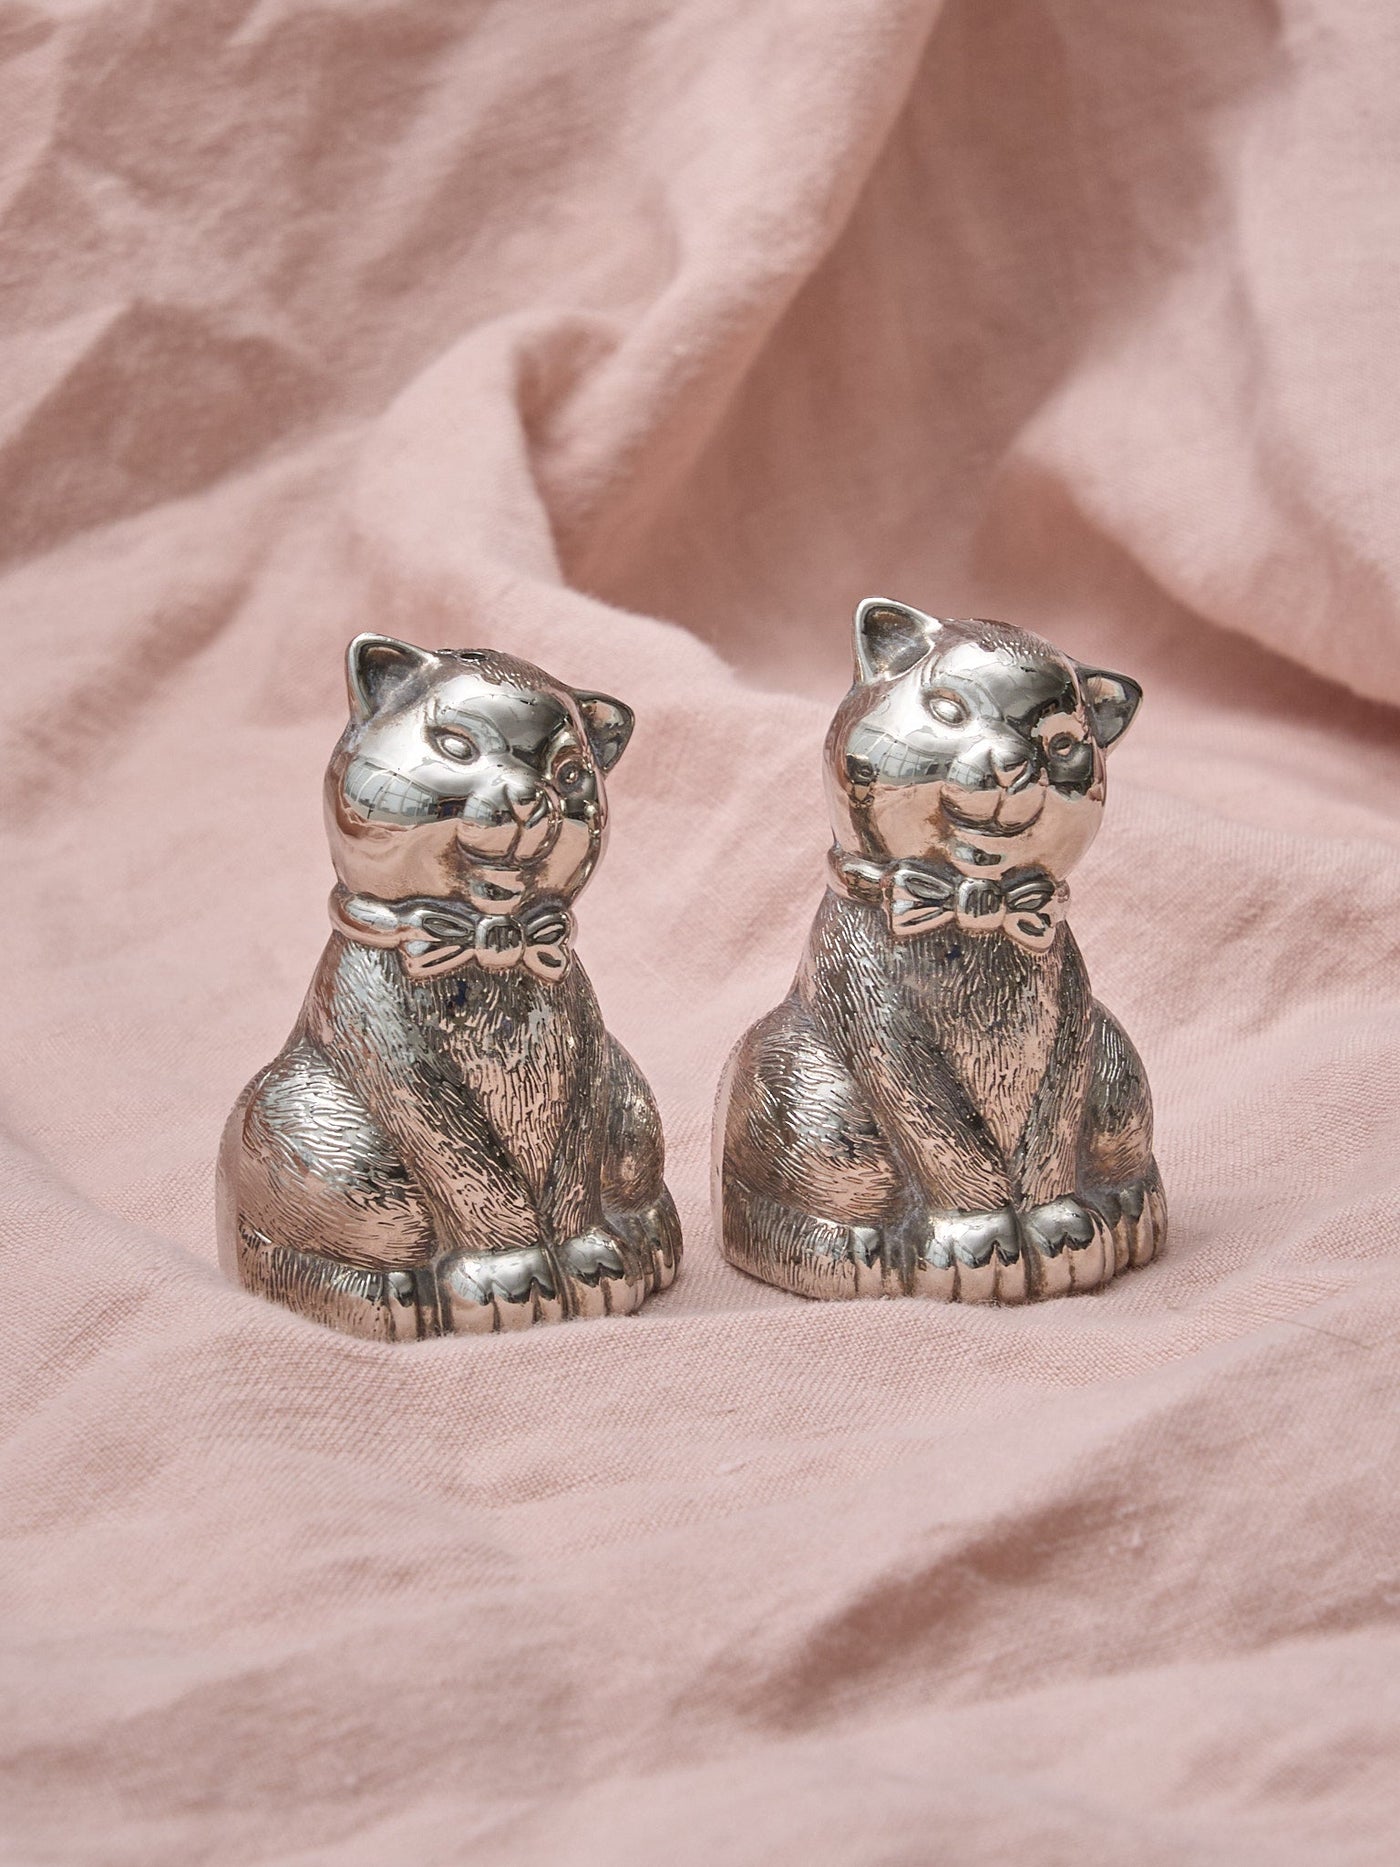 Silver Cat Salt and Pepper Shakers